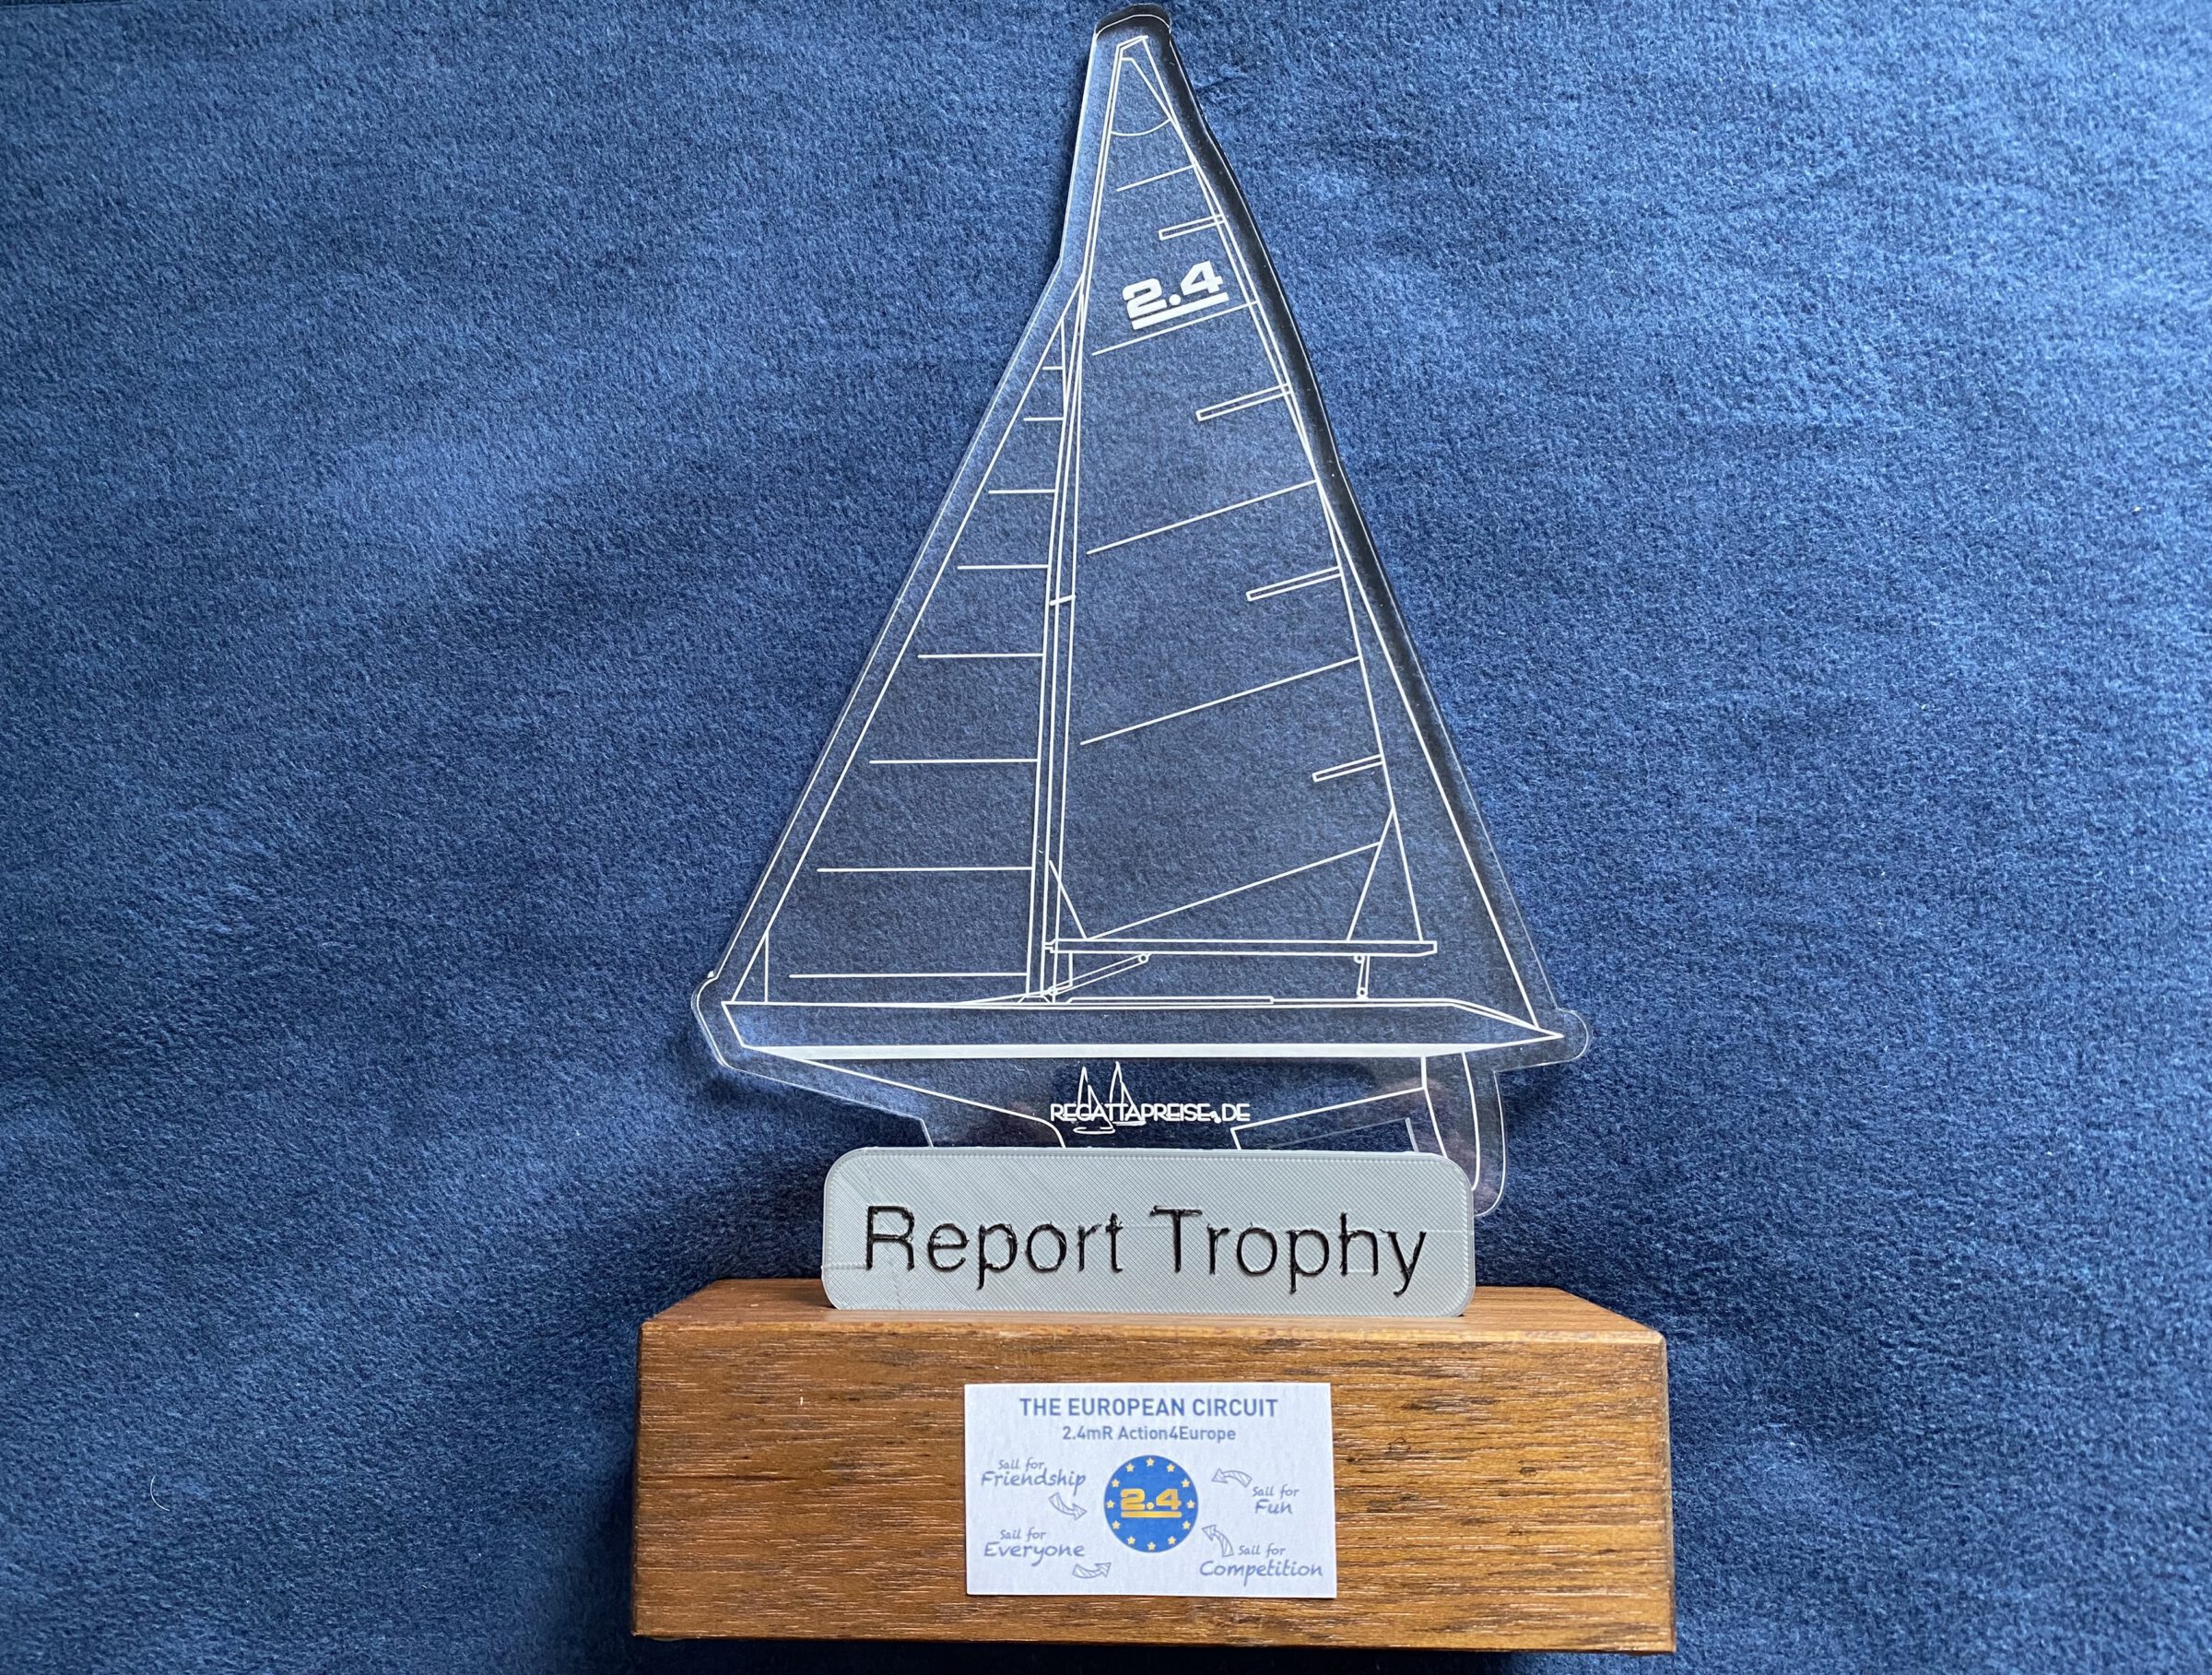 Report Trophy at the European Circuit